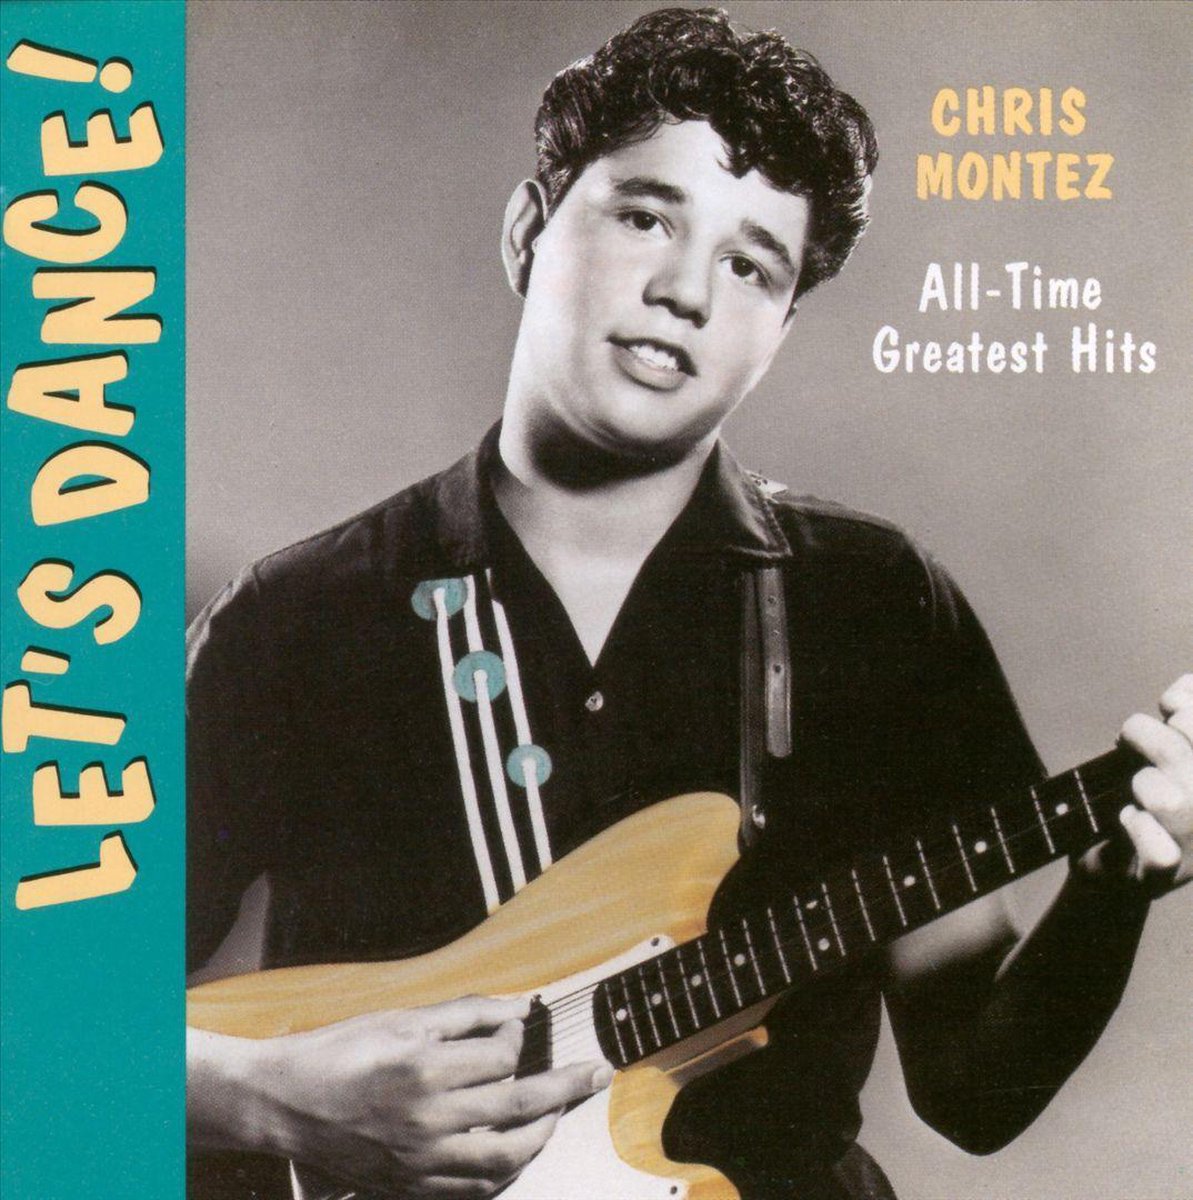 All-Time Greatest Hits - Chris Montez